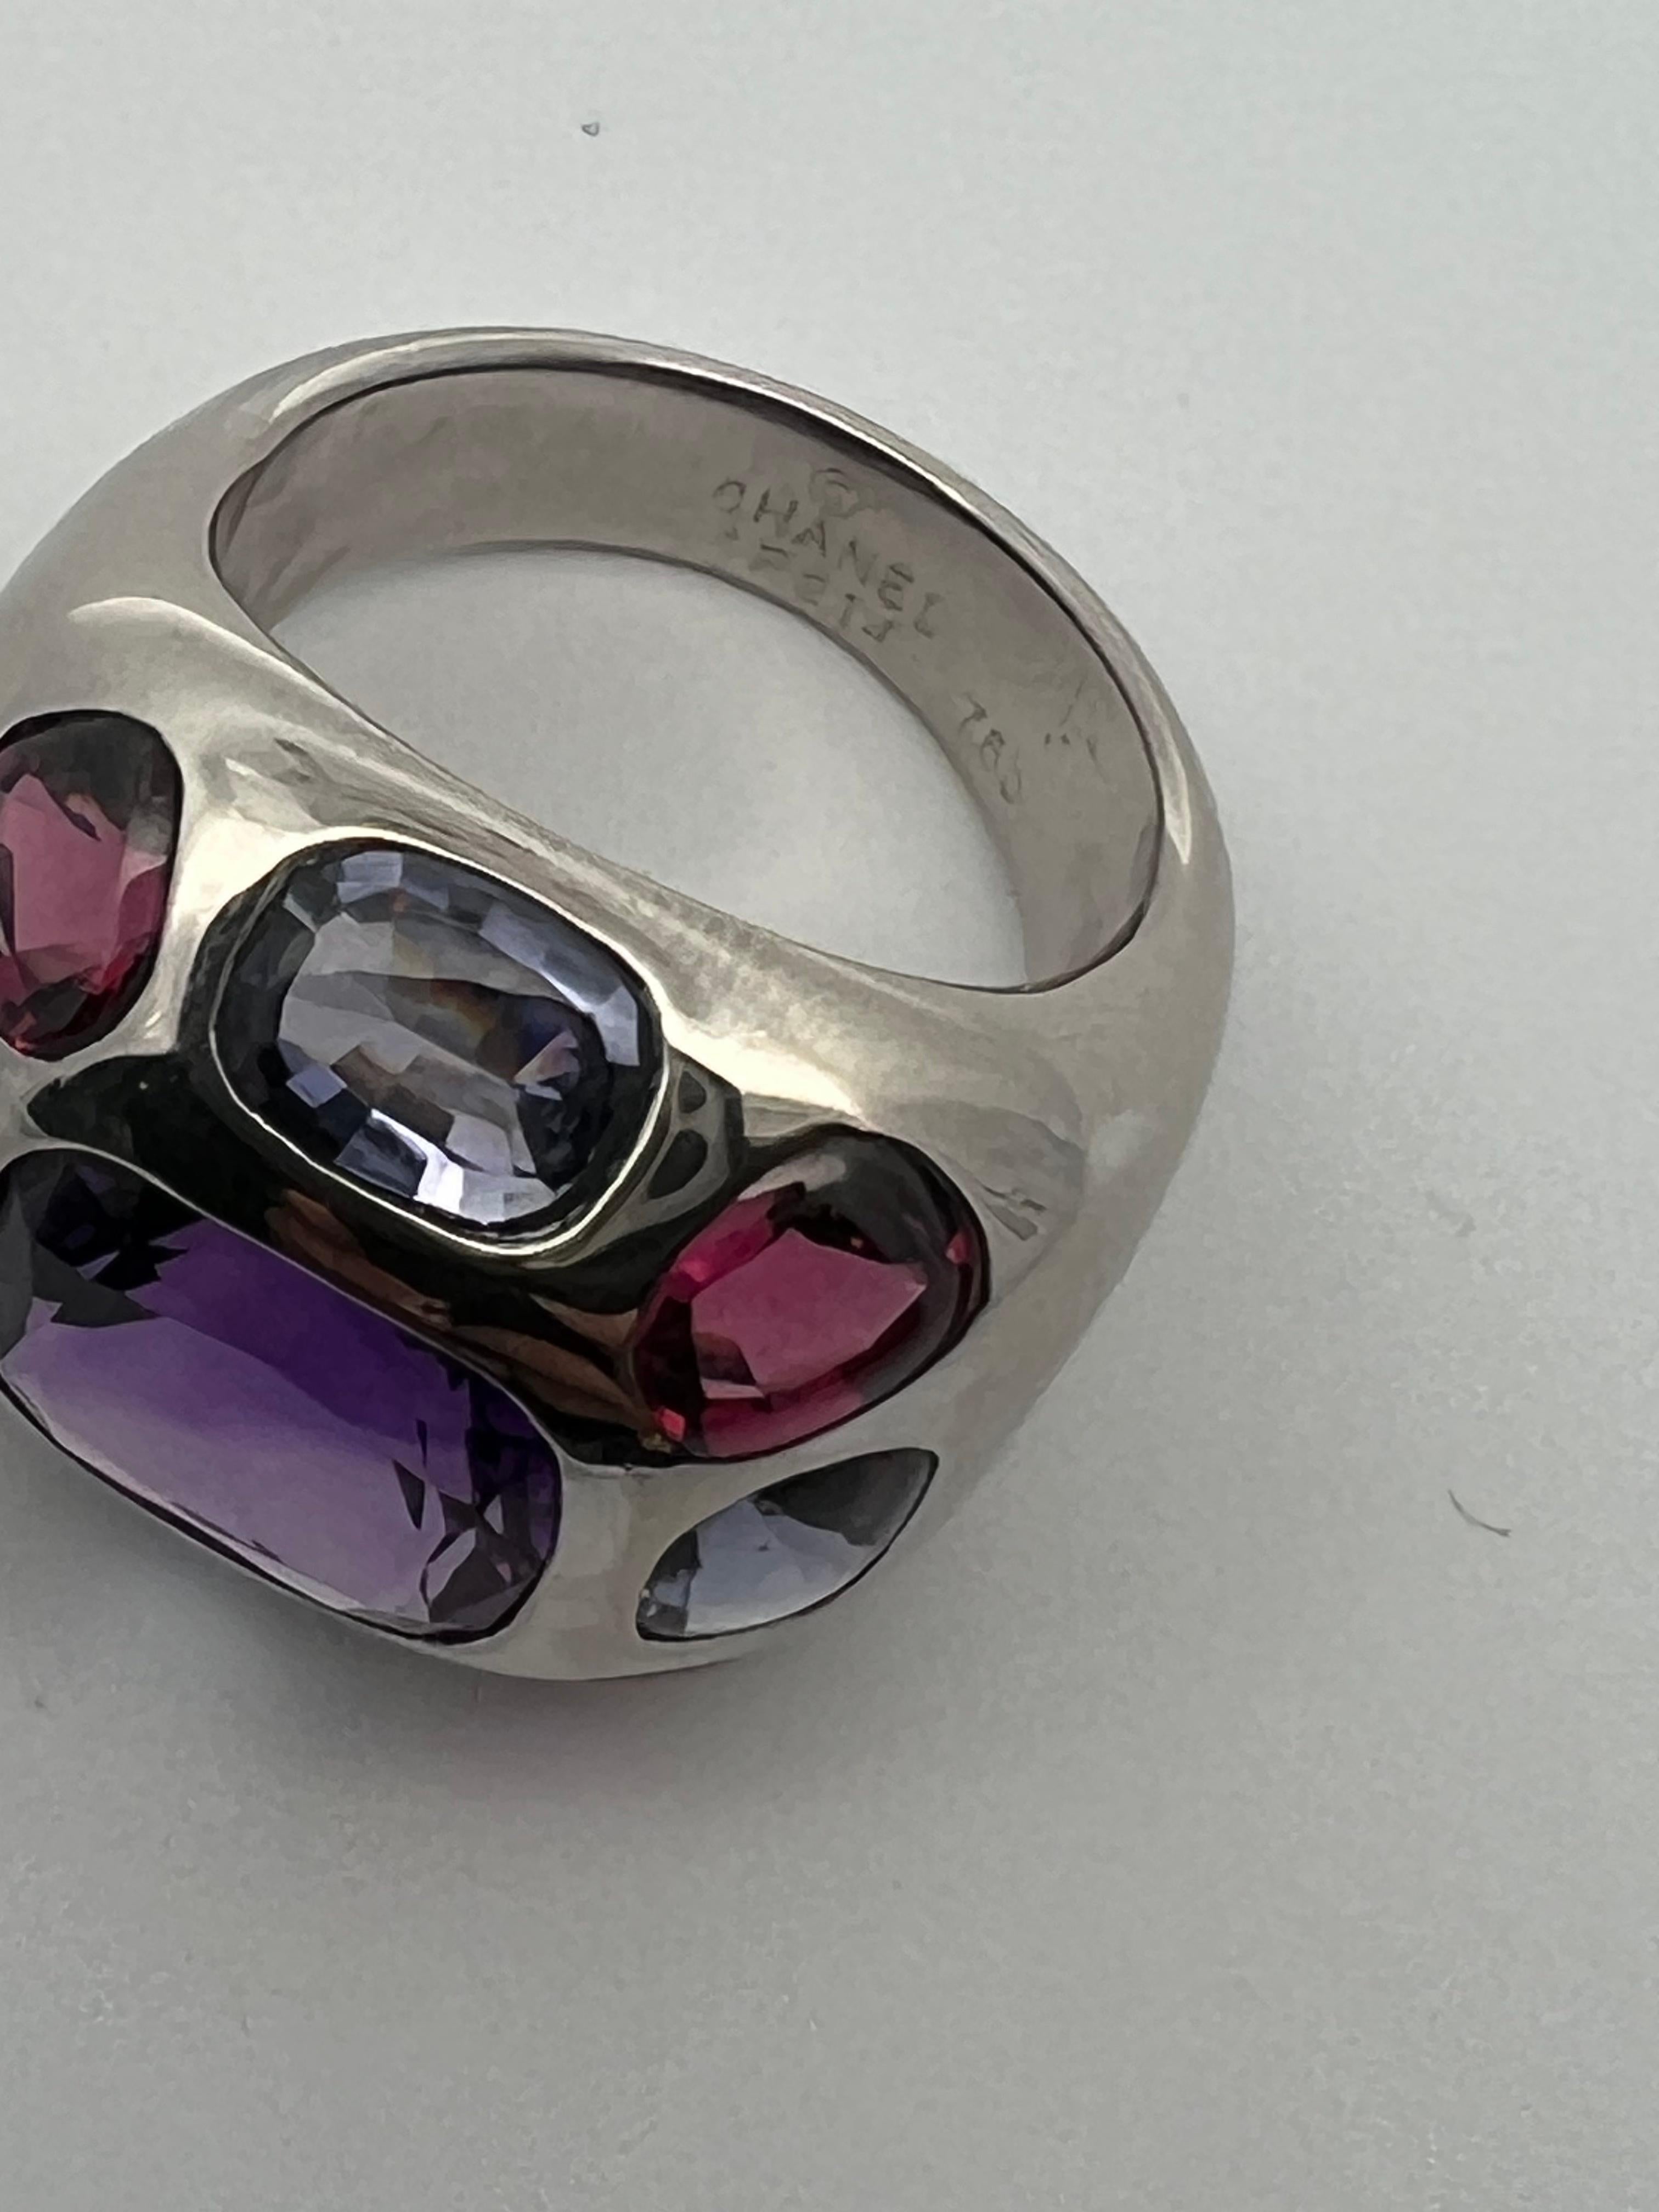 Amethyst, Garnet and Iolite, 18k white gold ring by Chanel For Sale 5